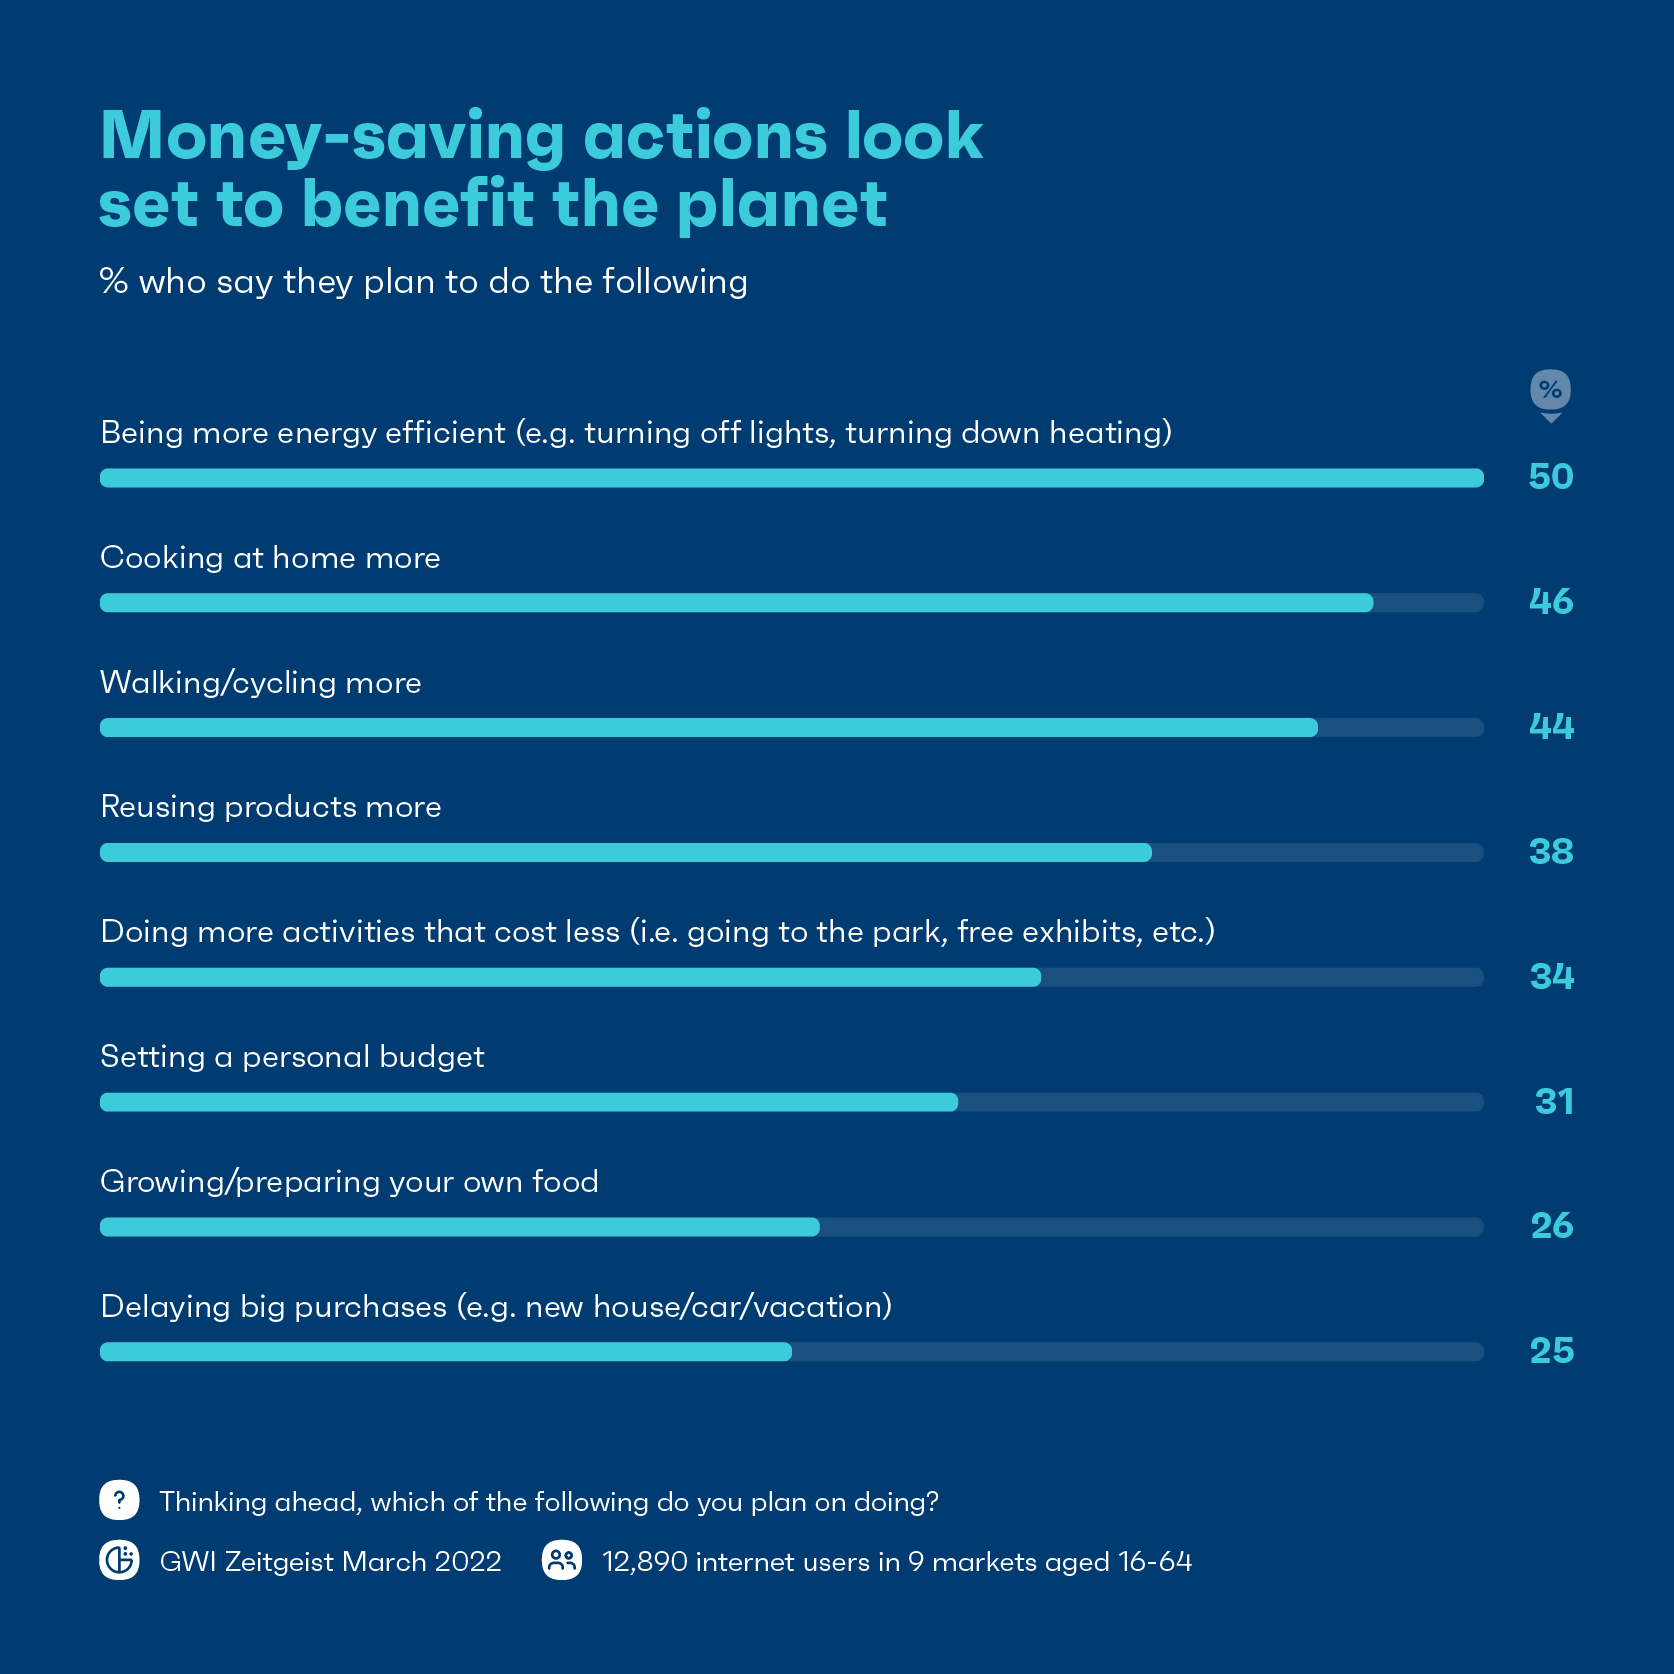 Money-saving actions look to benefit the planet